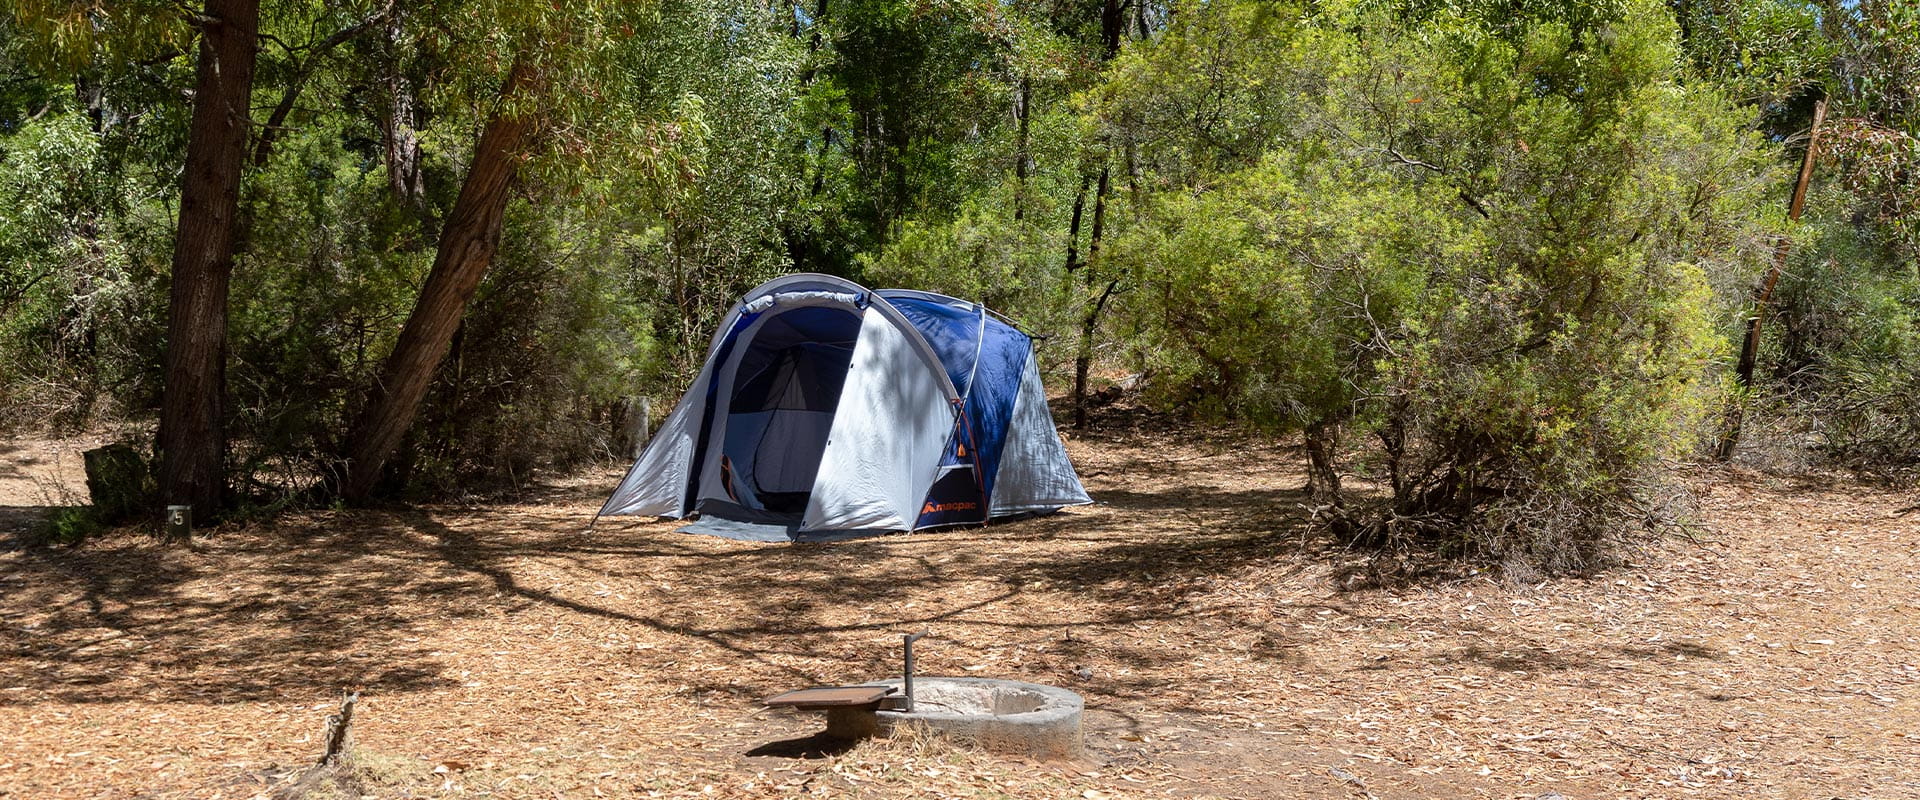 A grey and blue family dome tent set up against a background of dry eucalypt forest 